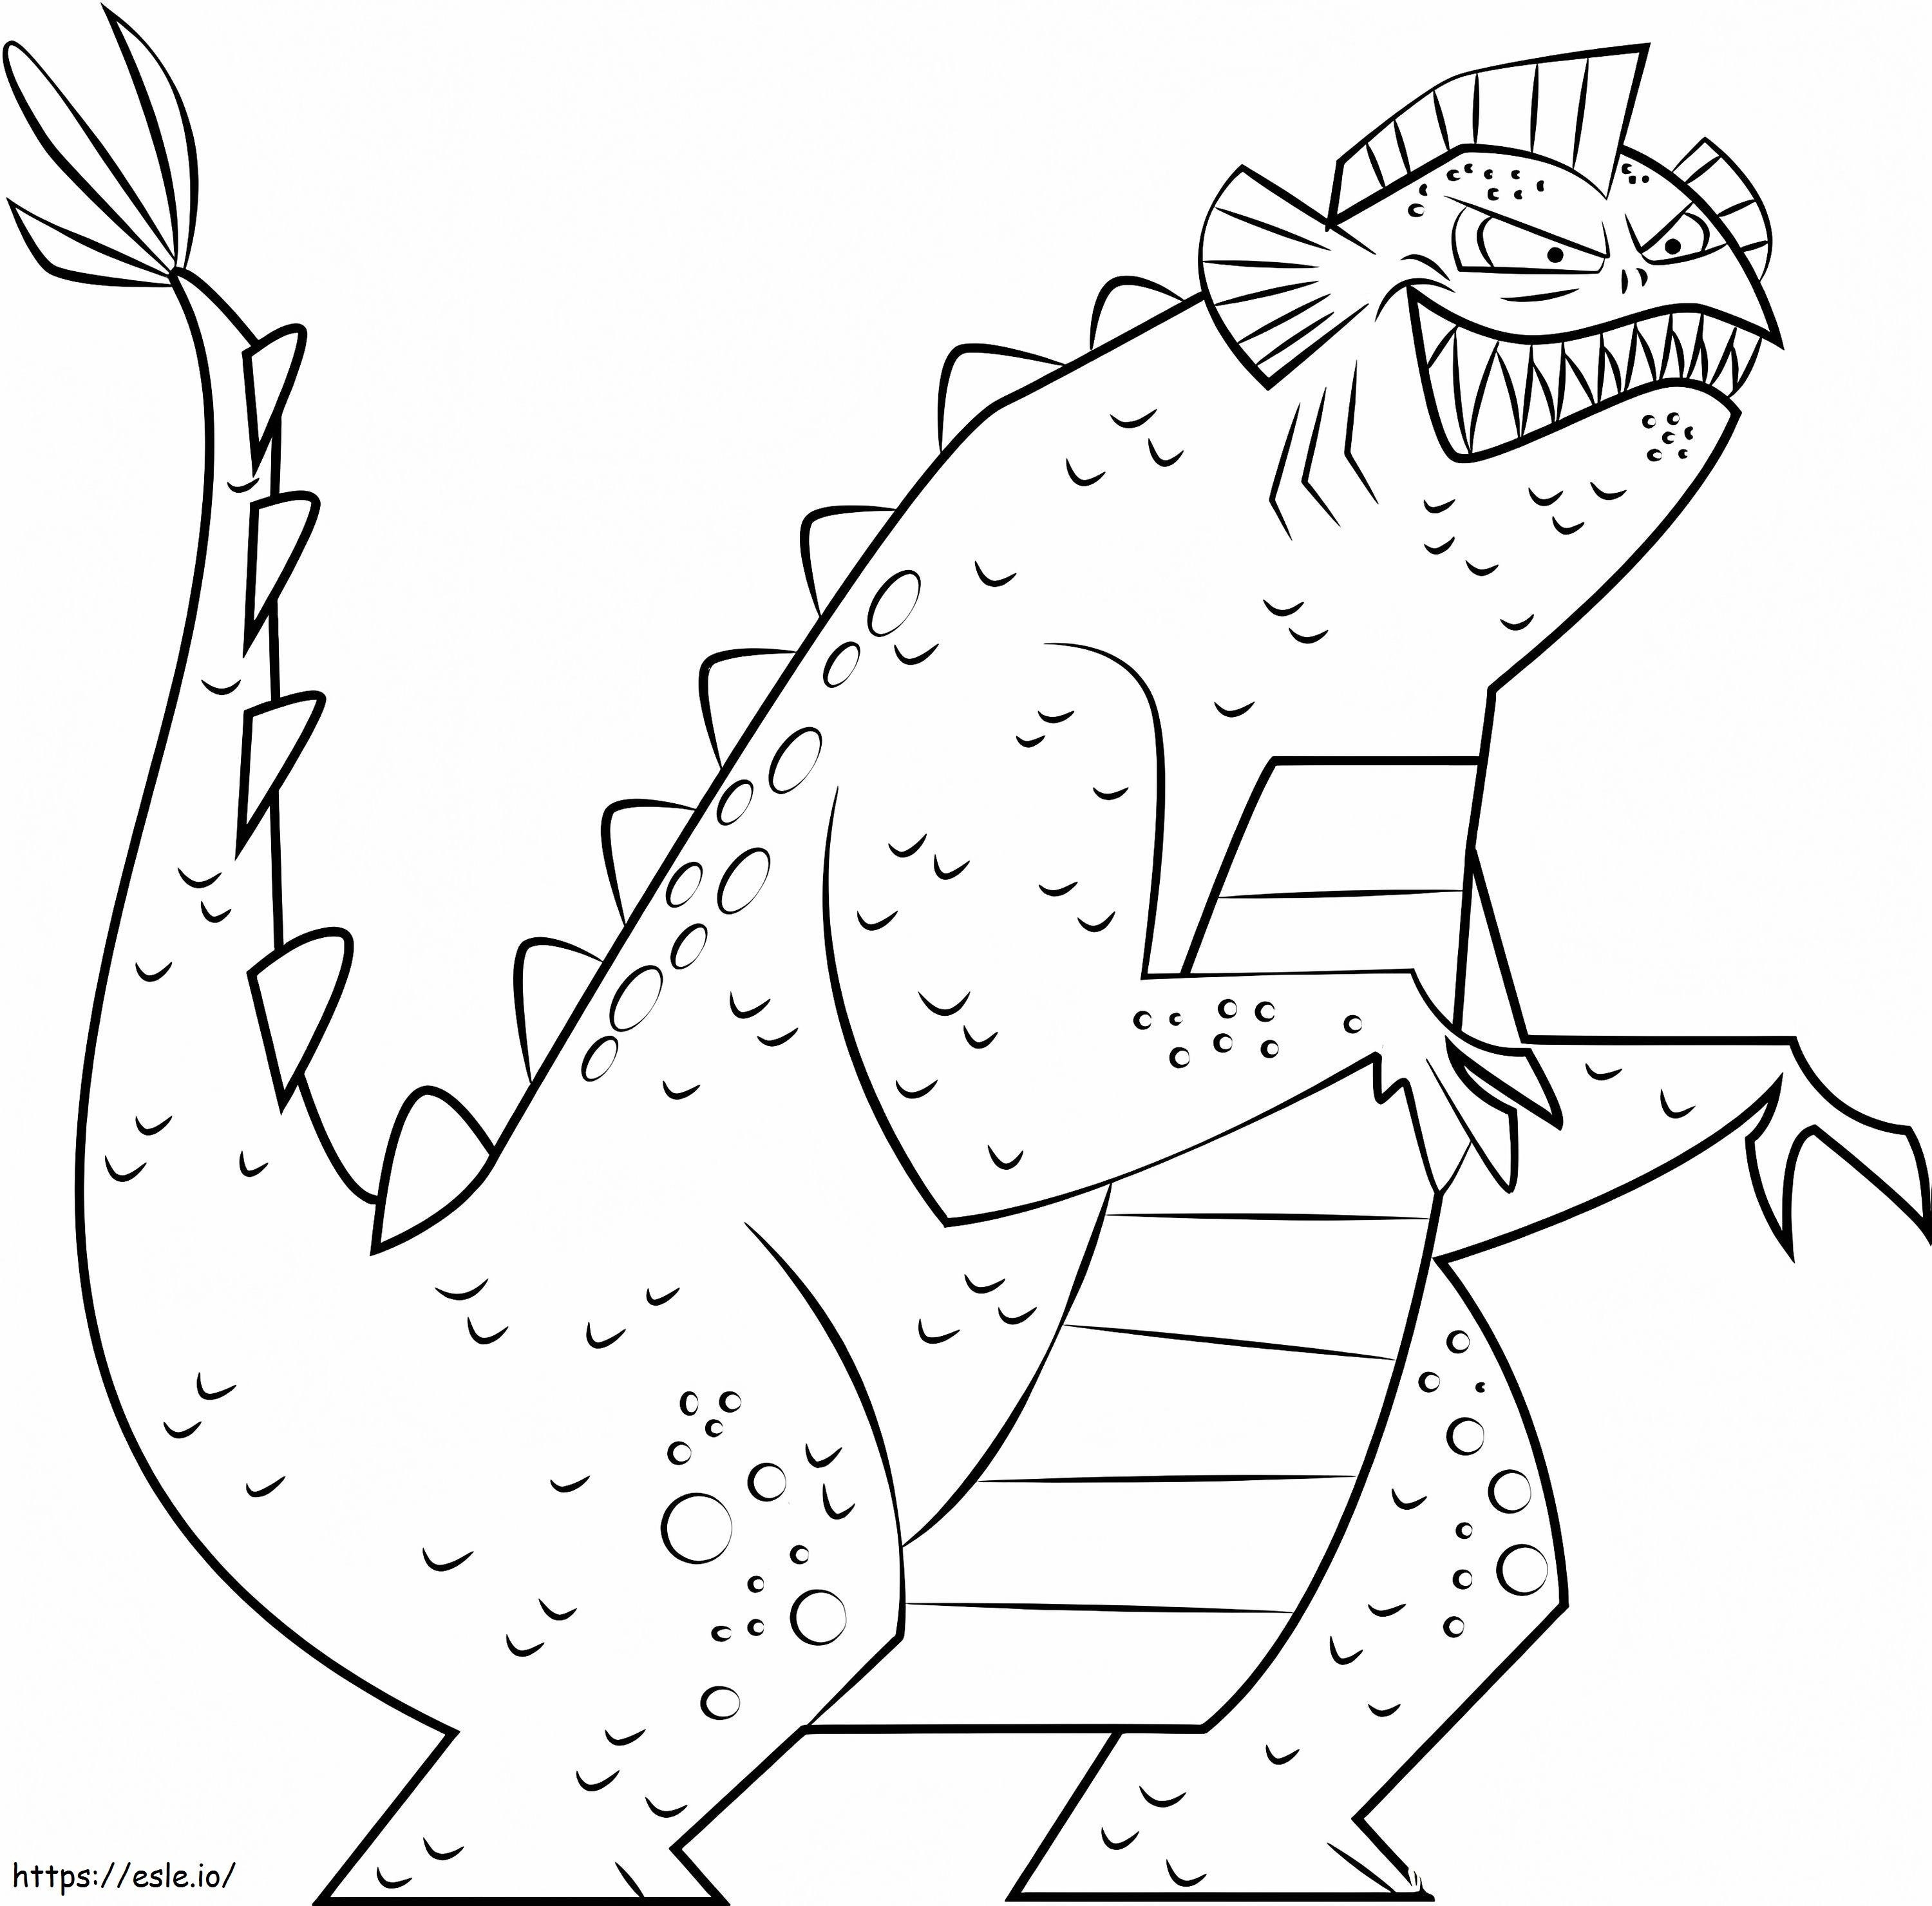 Big Monster coloring page